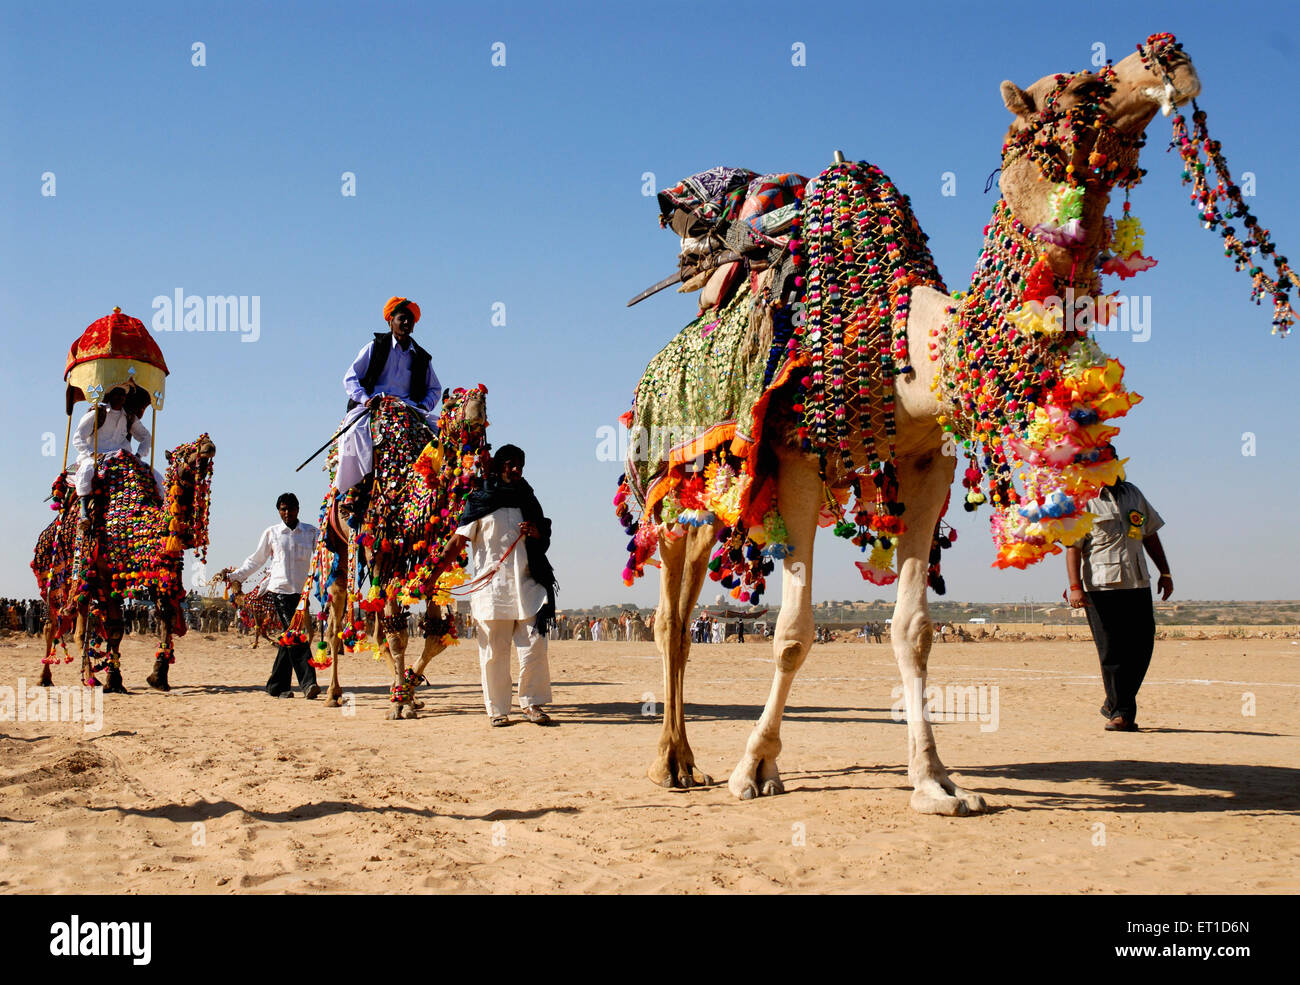 Camel march in opening ceremony of desert festival ; Jaisalmer ; Rajasthan ; India 2009 Stock Photo